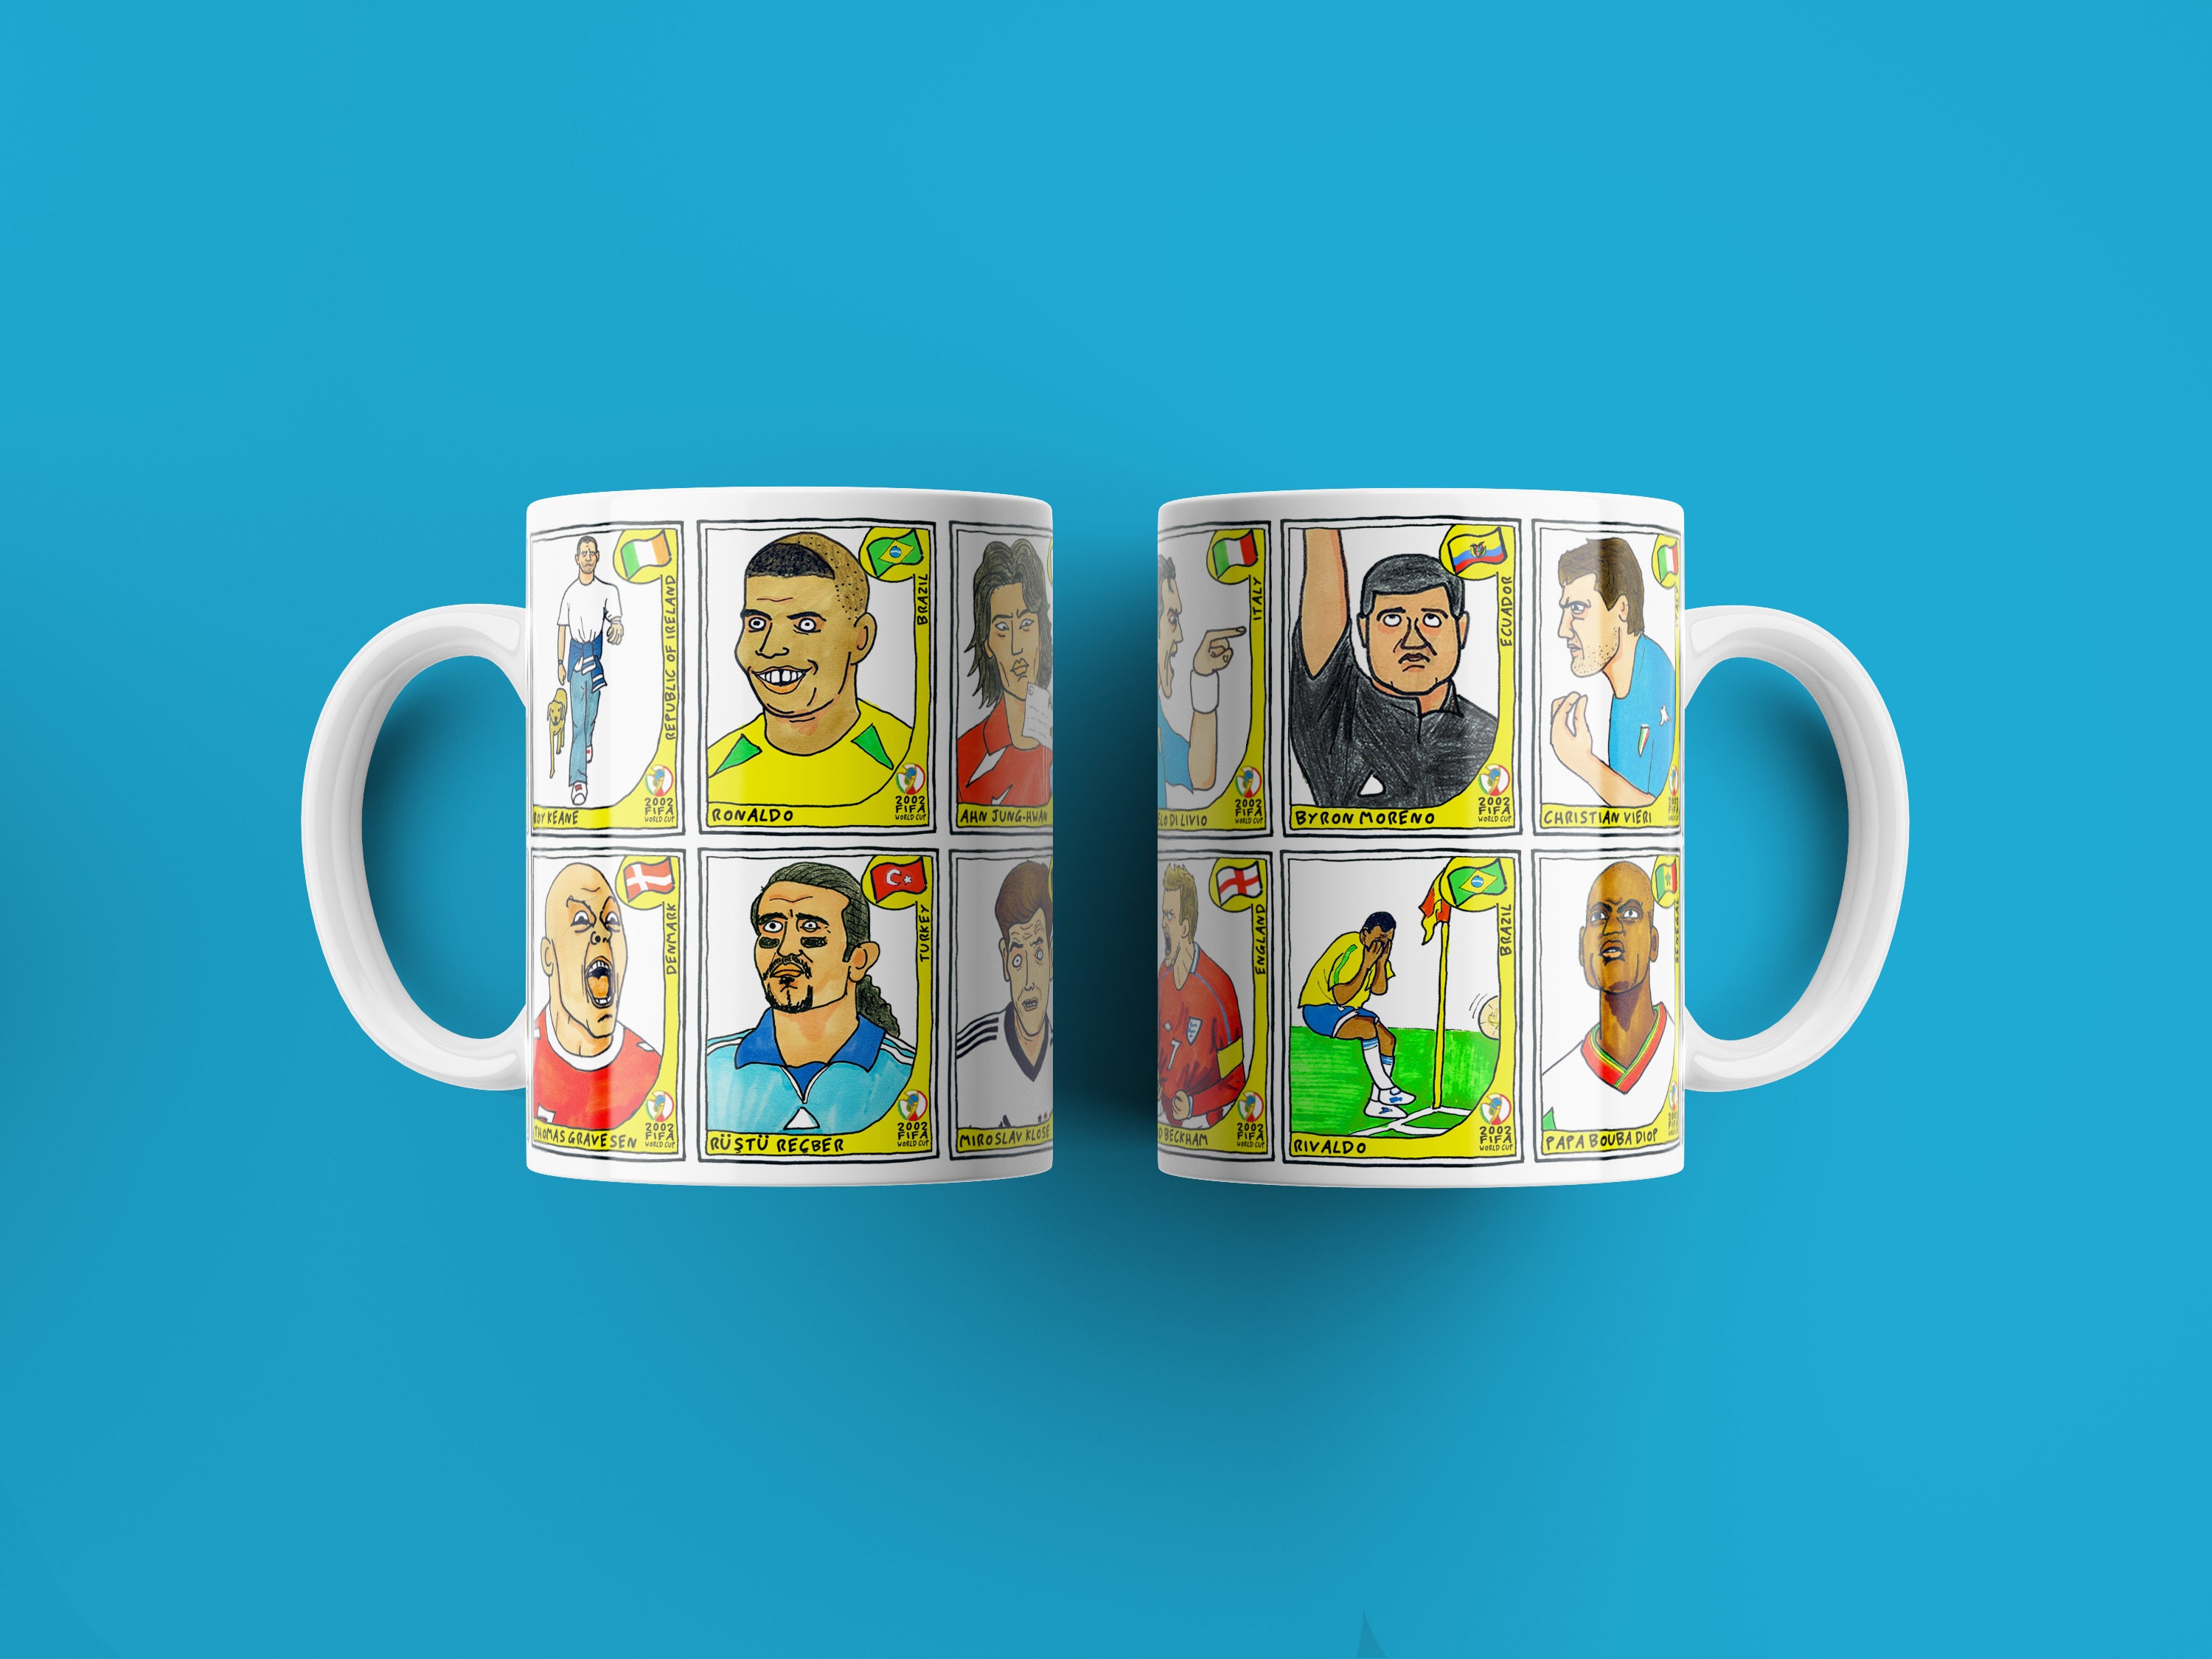 World Cup Collection – KaseMe